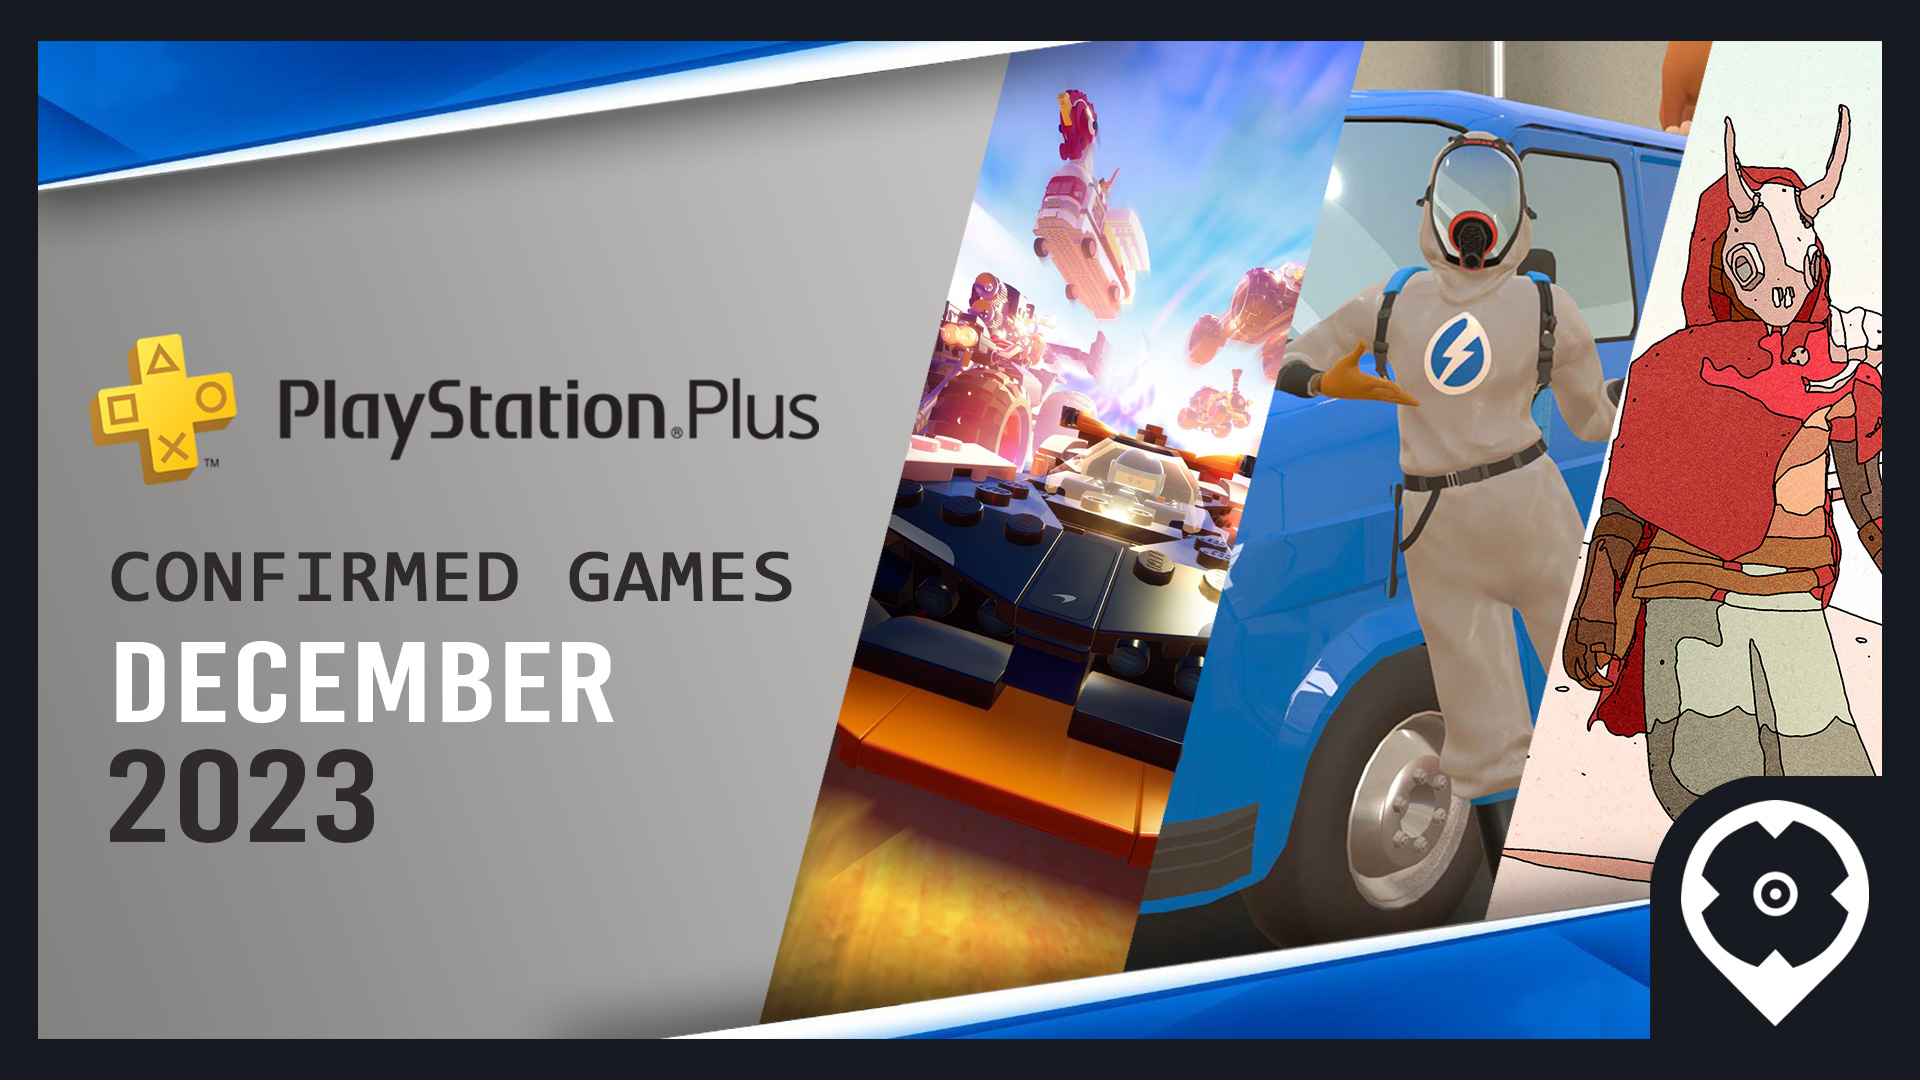 PlayStation Plus Free Games For December 2023 Confirmed